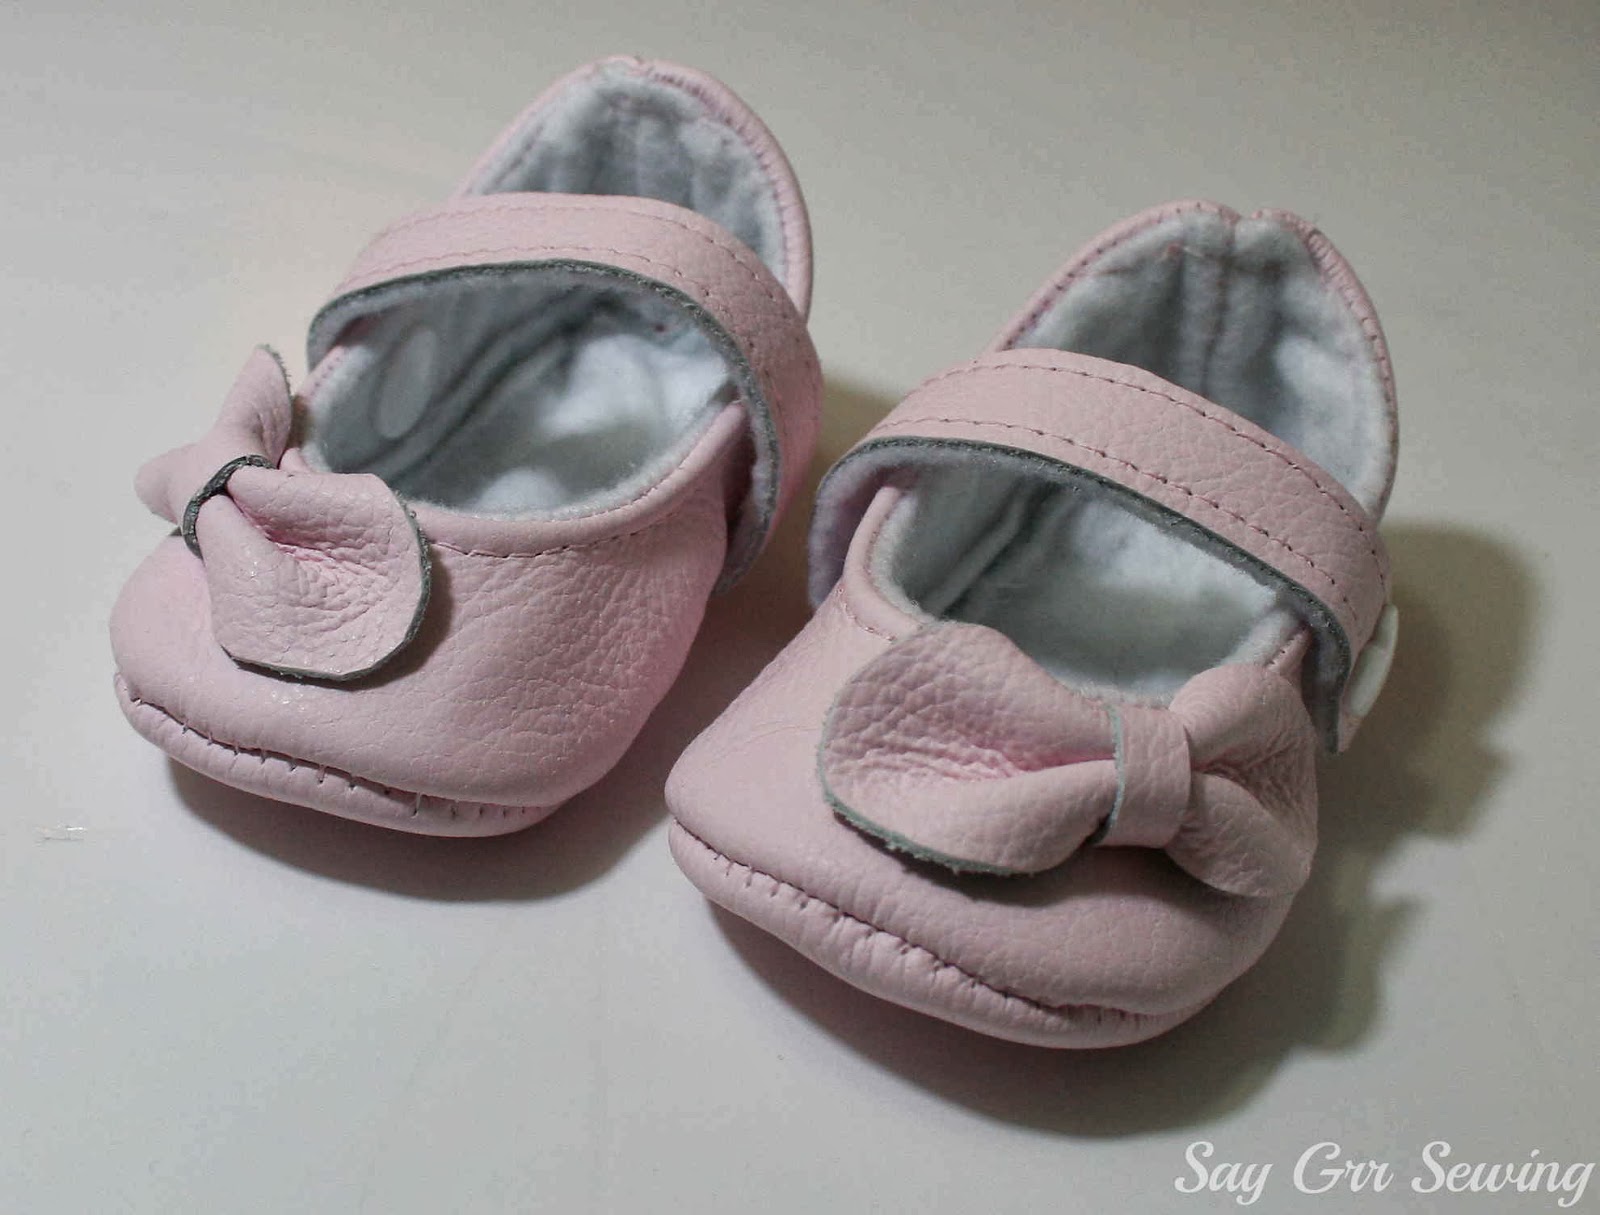 Say Grr Sewing: Pink Bow Baby Shoes